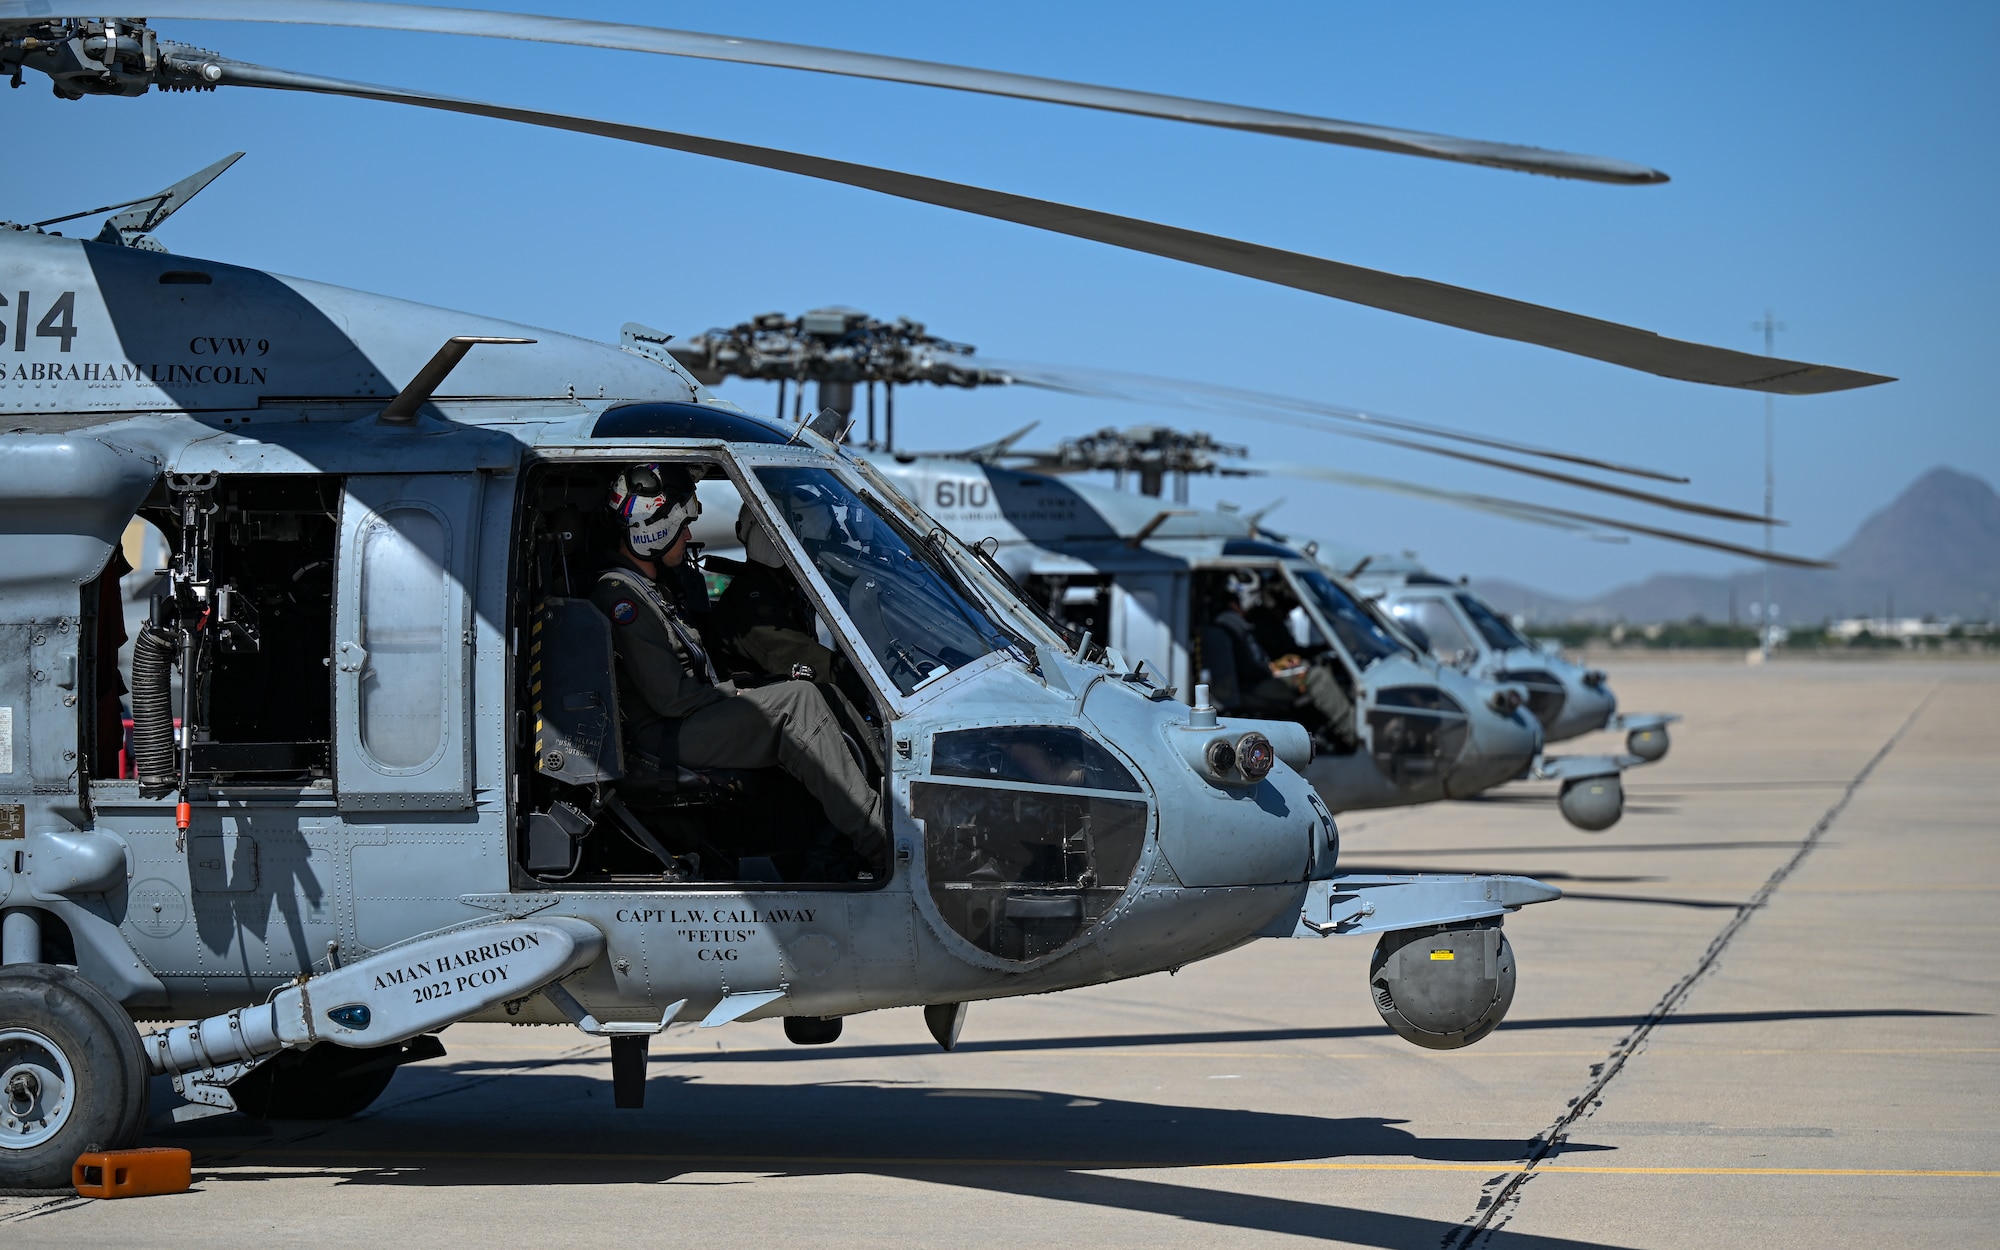 Three helicopters parked in a line.